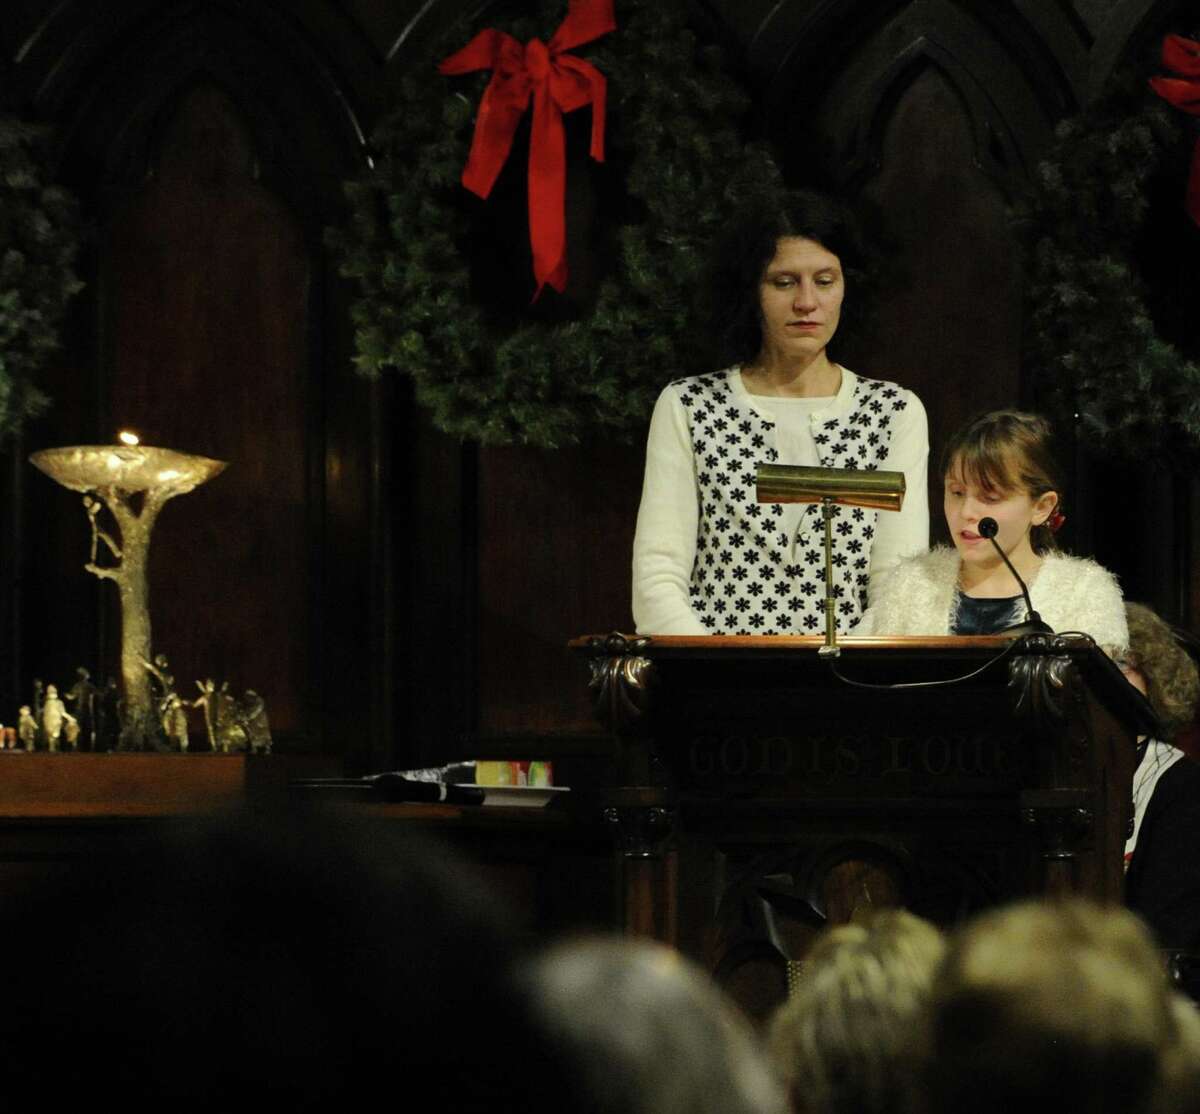 With her mother Celeste Frye-Lintern at her side, Tallulah Lintern, 10, of Stamford recites a reading as part of a Christmas Eve service. The Unitarian Universalist Congregation in Stamford holds "Fear Not Good News, Great Joy, For All People," a "Christmas Eve Carol" and candlelight service in Stamford on Dec.24, 2016.